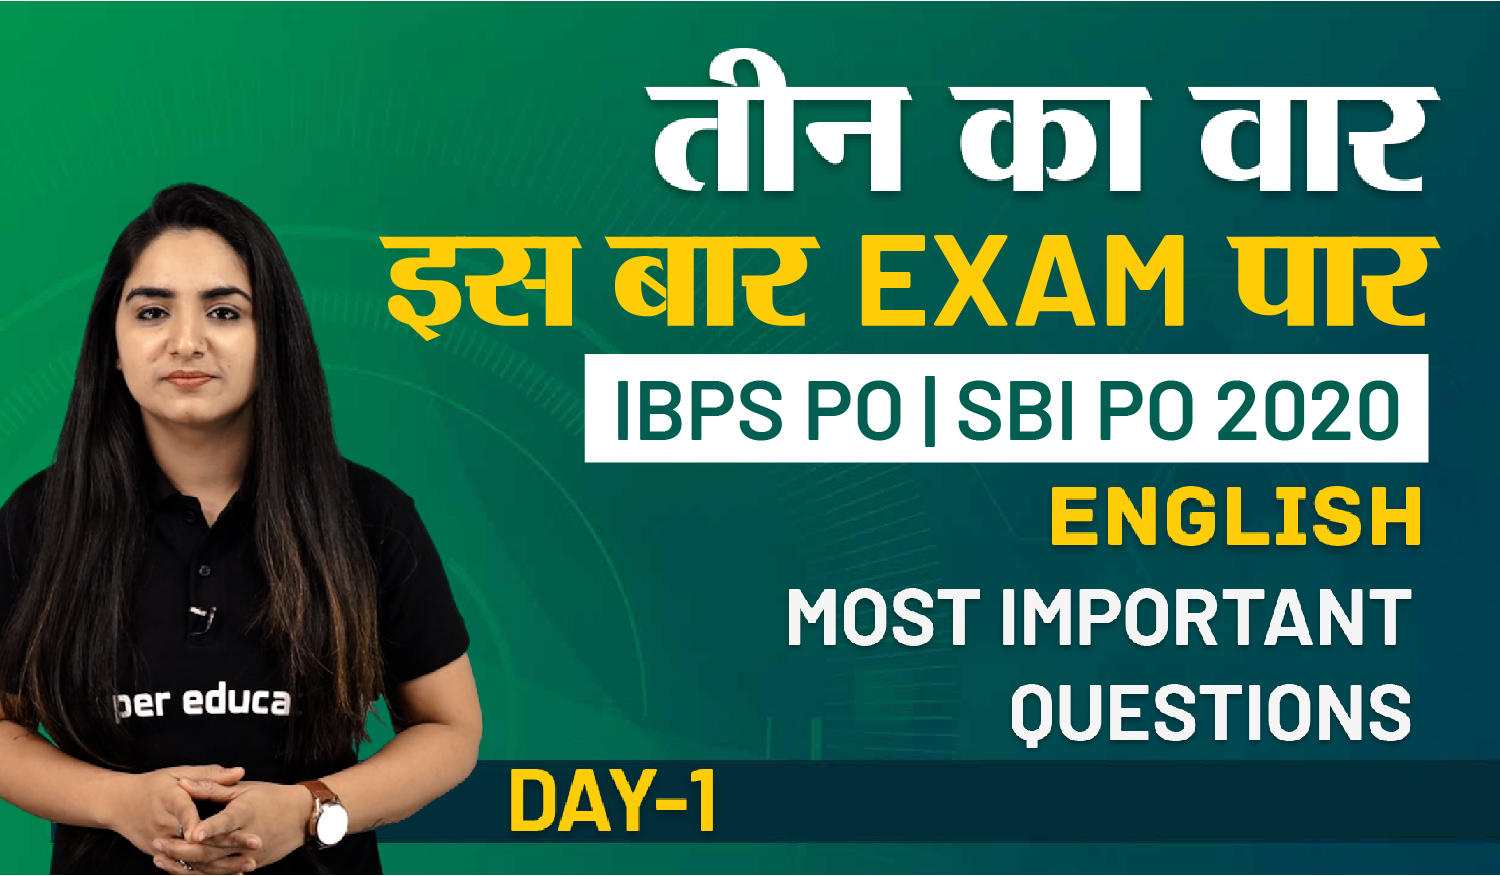 Anchal Ma'am is Live now with "Most Important Questions" for English!_40.1